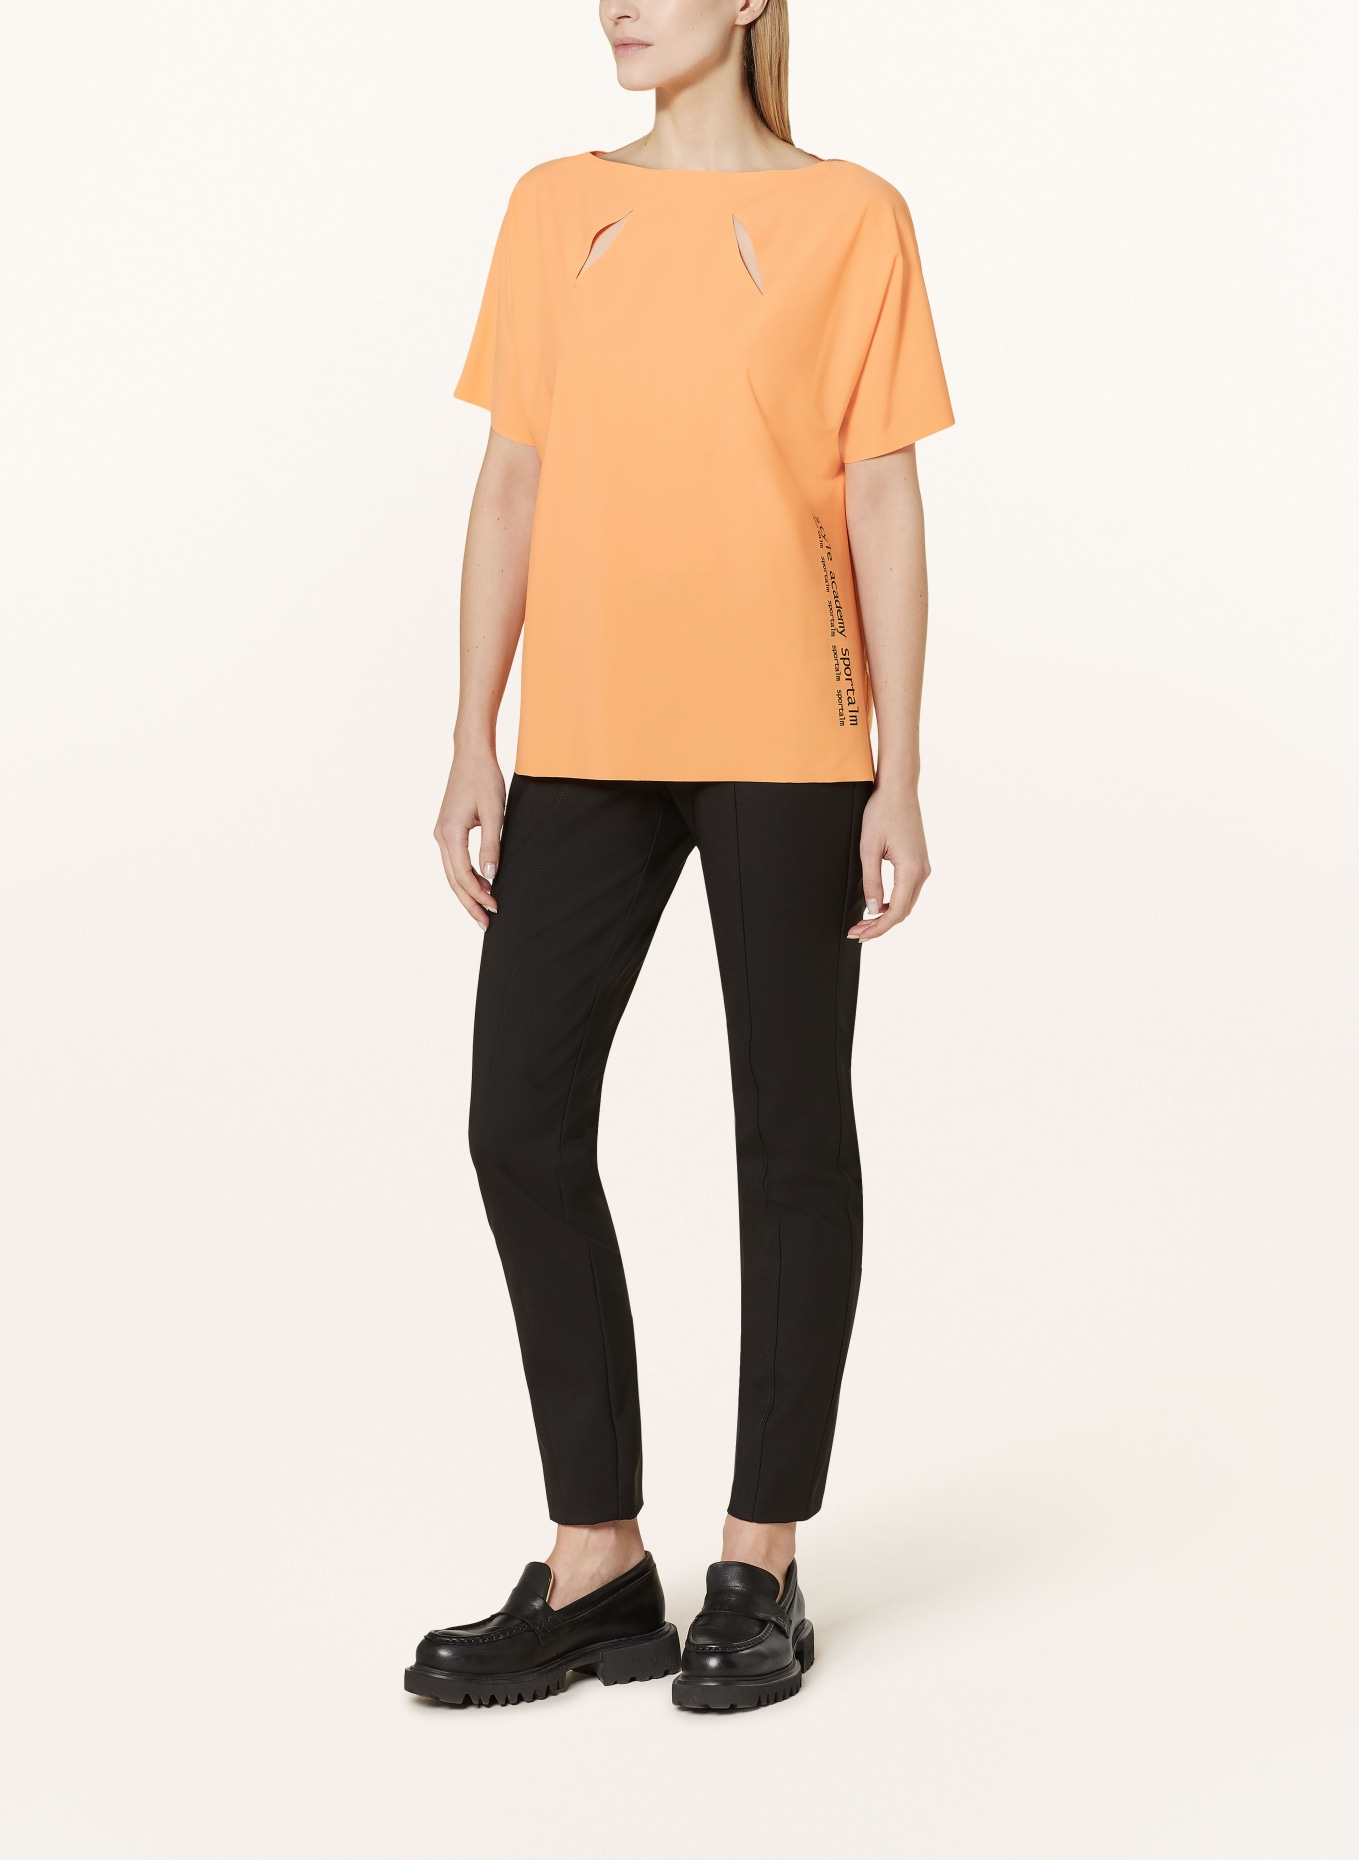 SPORTALM Shirt blouse with 3/4 sleeves, Color: ORANGE (Image 2)